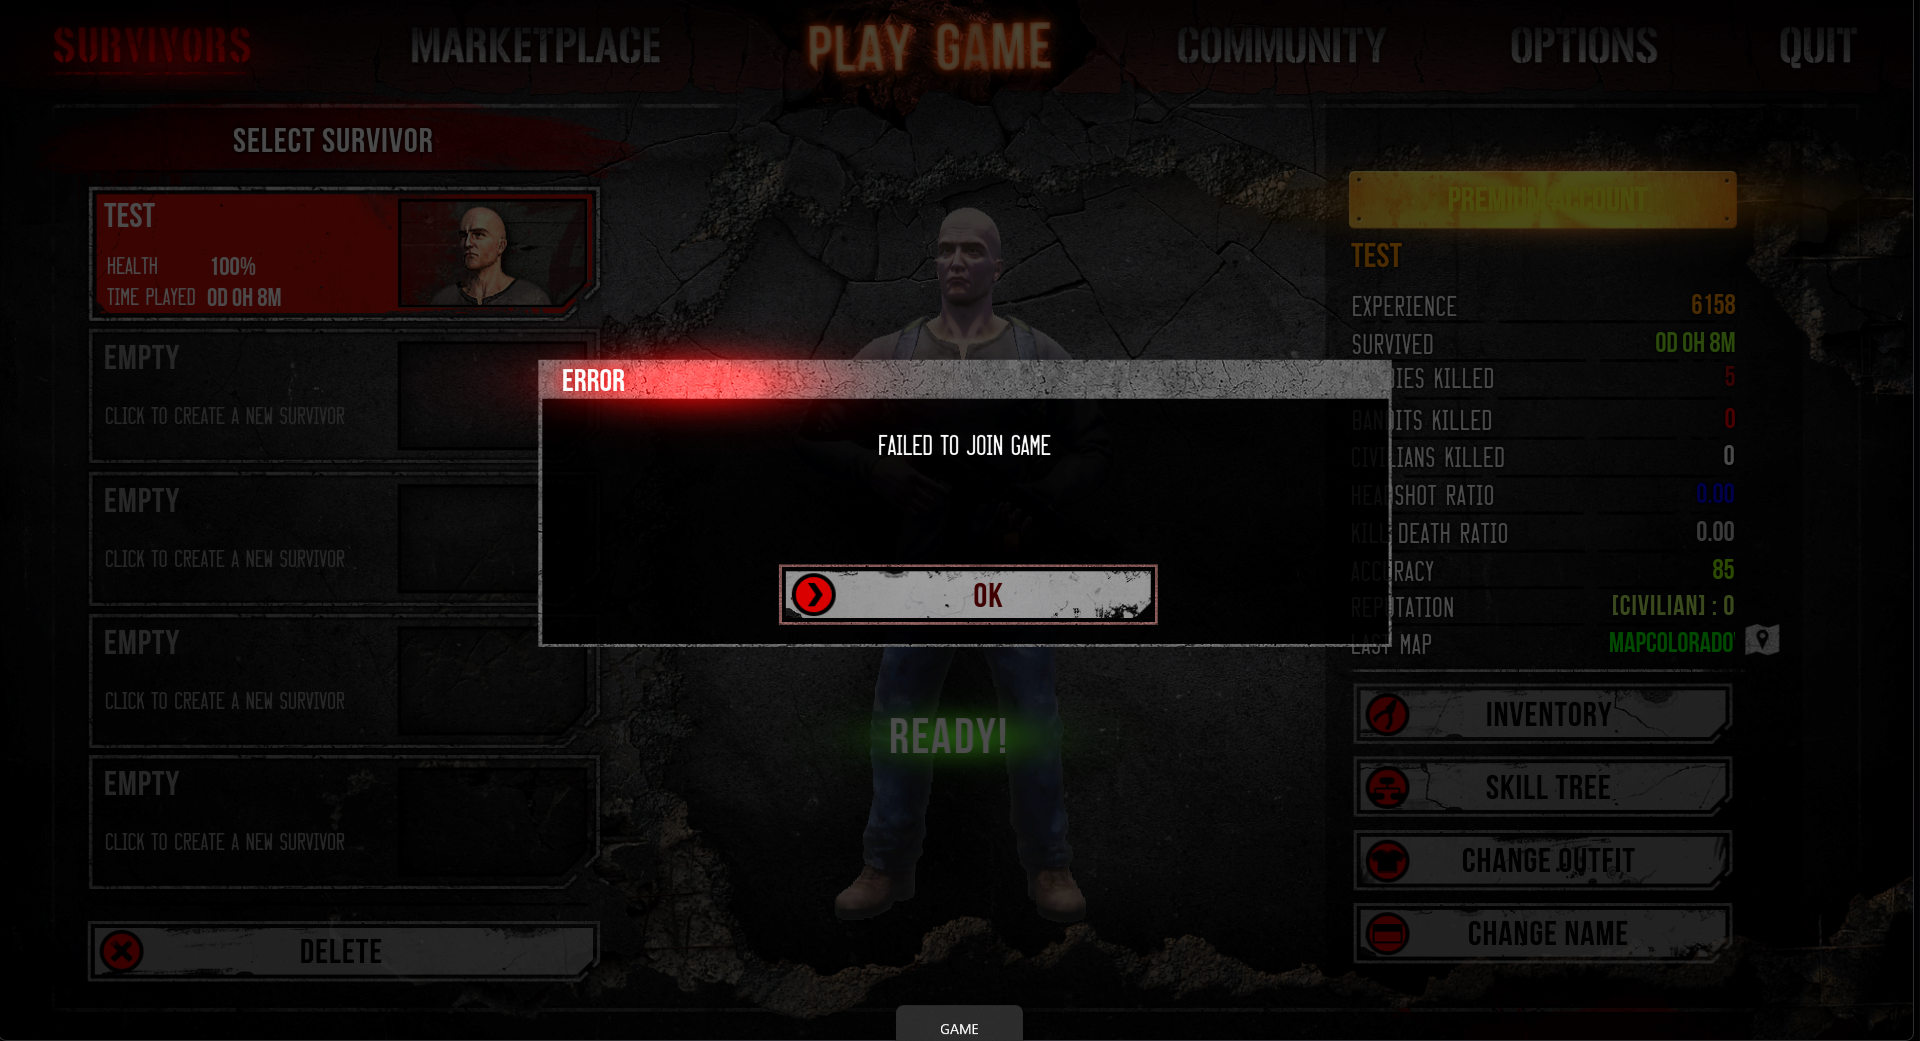 1703688236674 - [HELP] FAILED TO JOIN GAME - RaGEZONE Forums